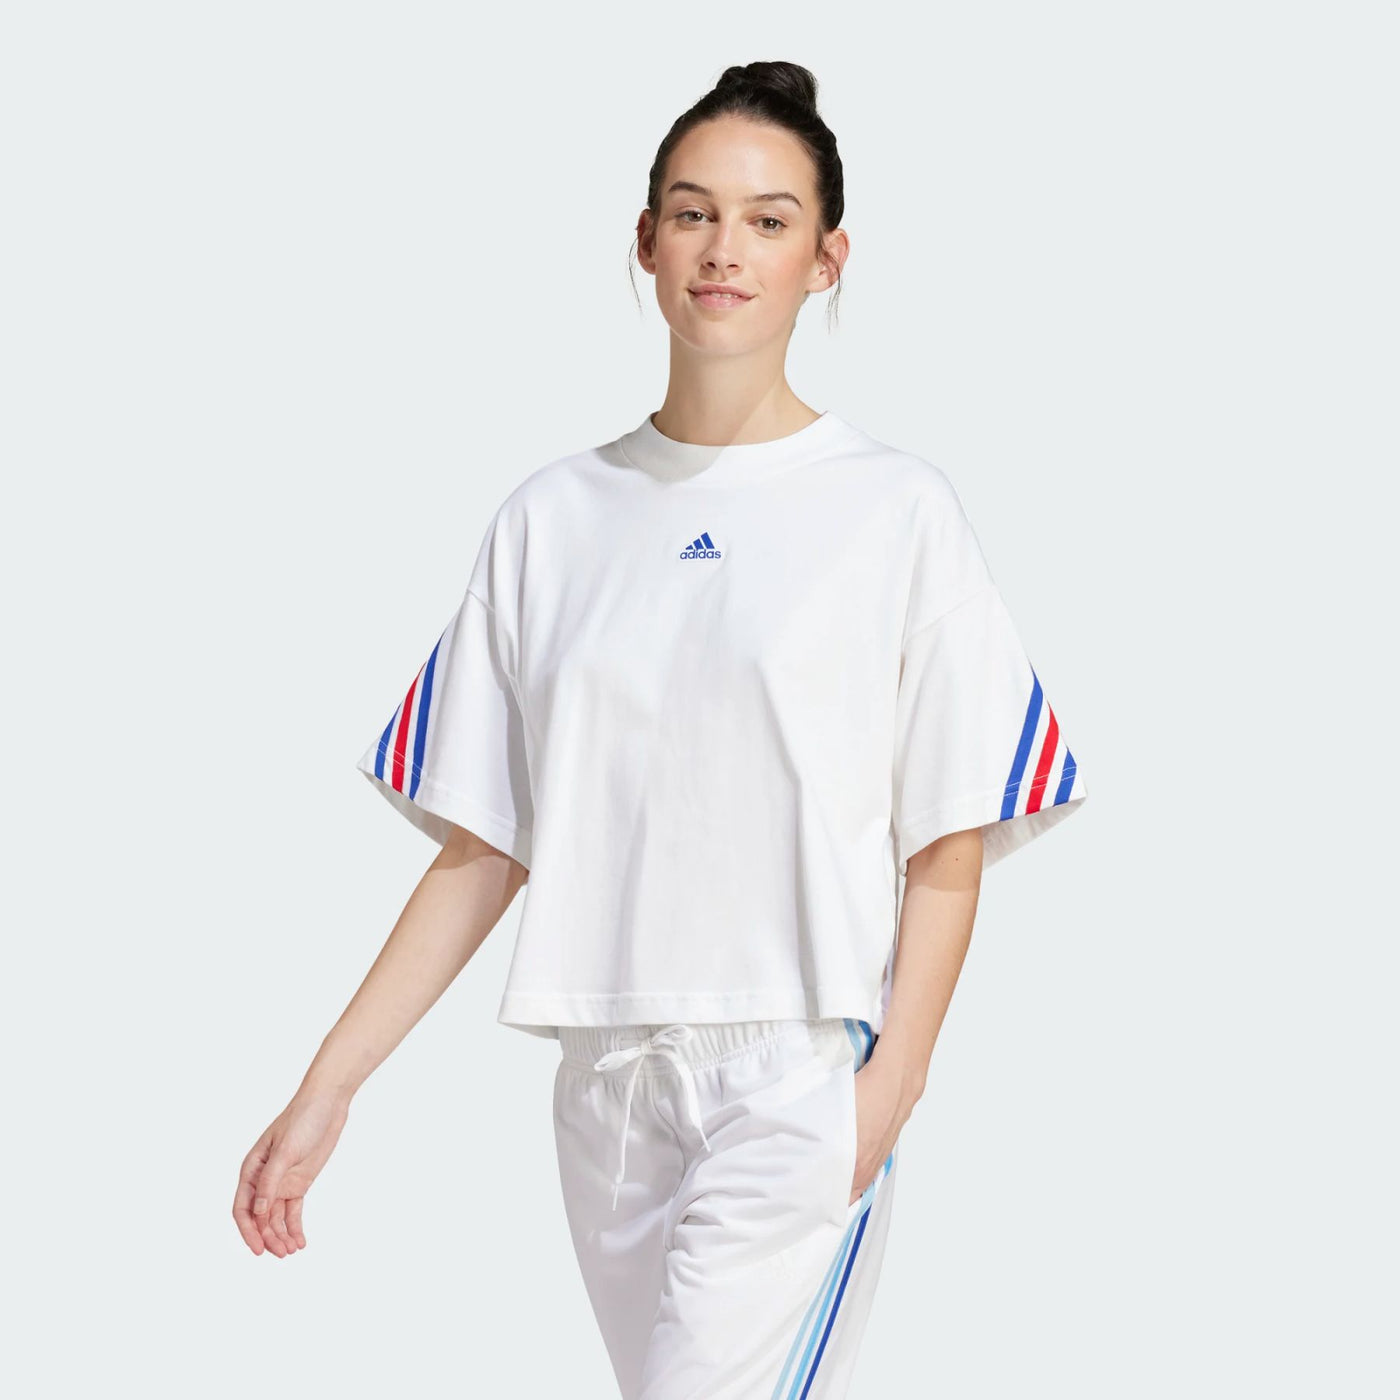 IS3236 - T-Shirt - Adidas